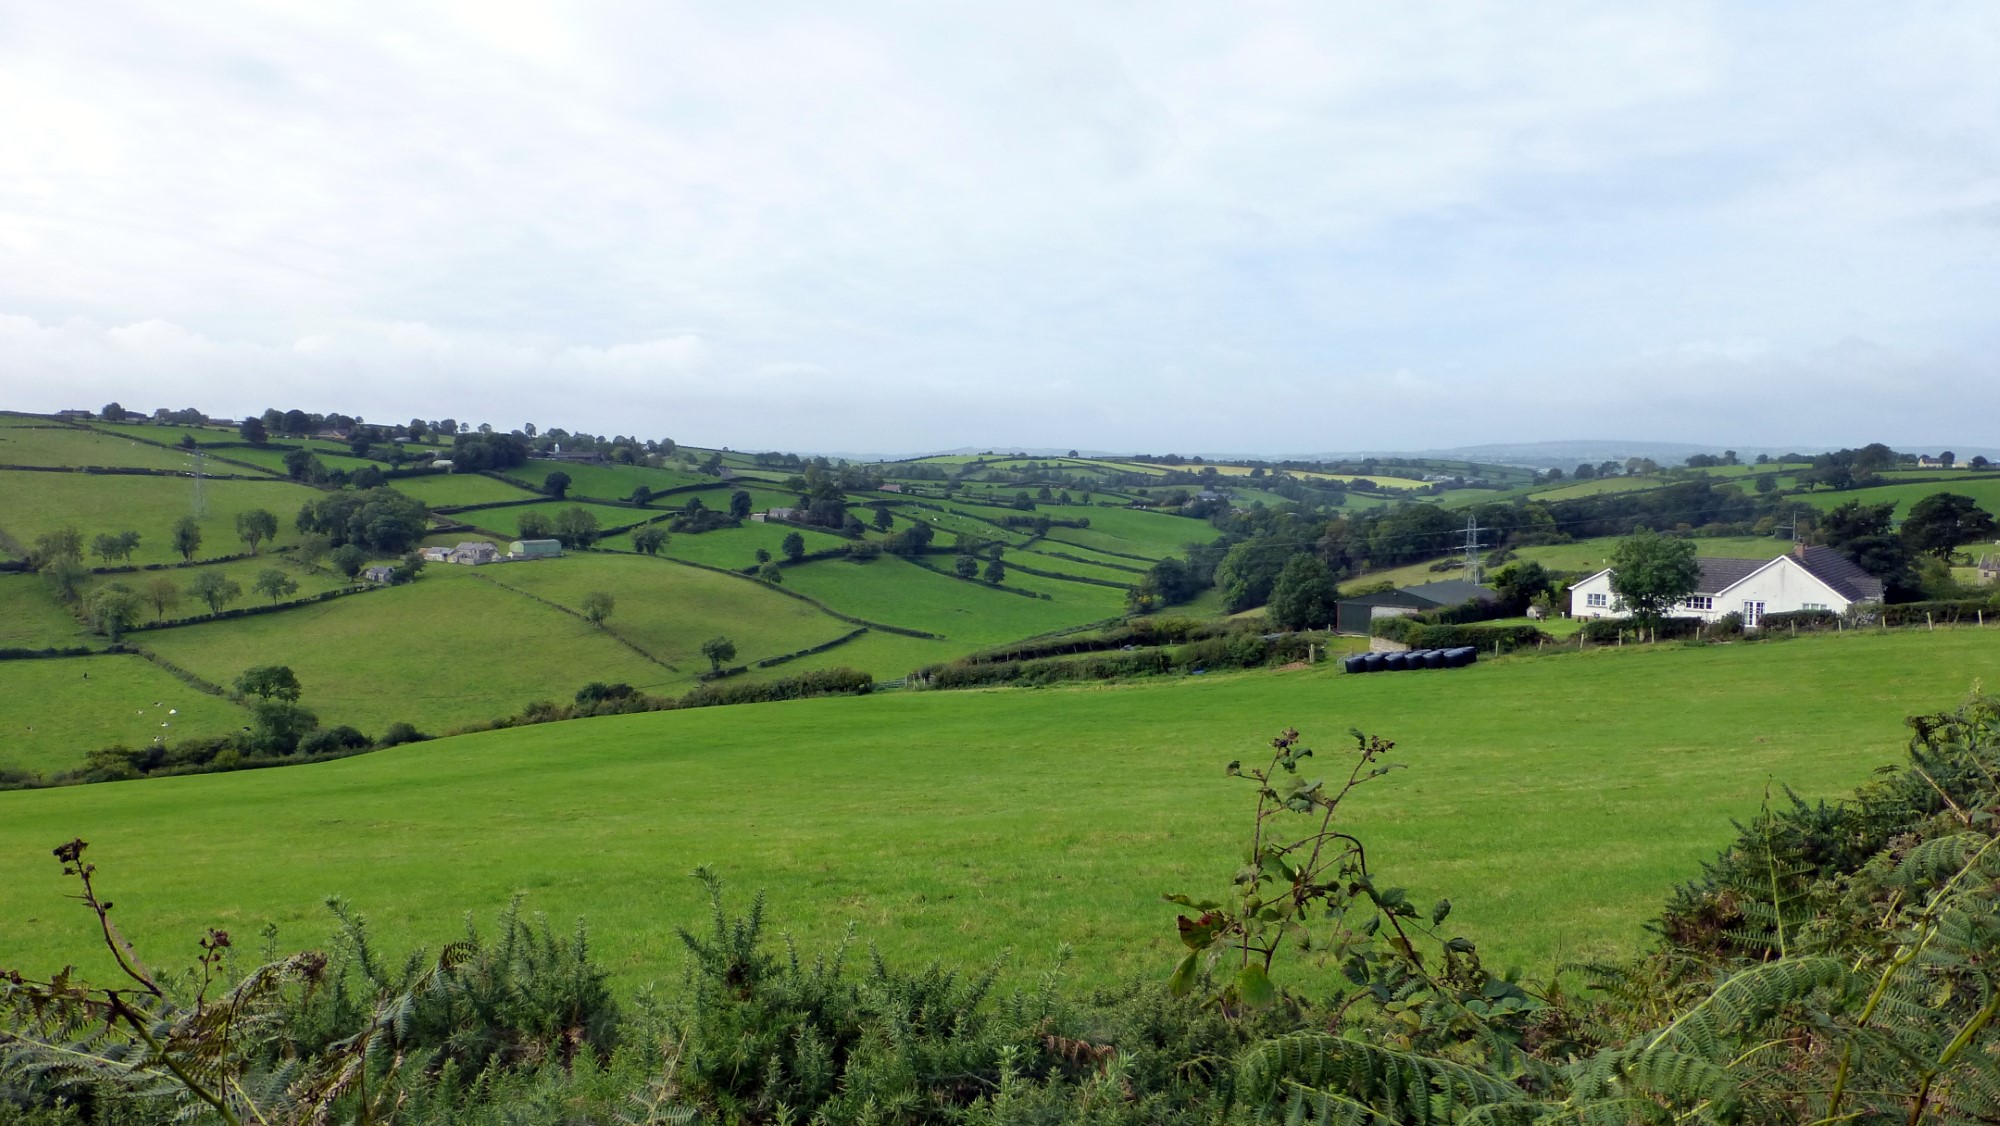 The Ballydogherty countryside.